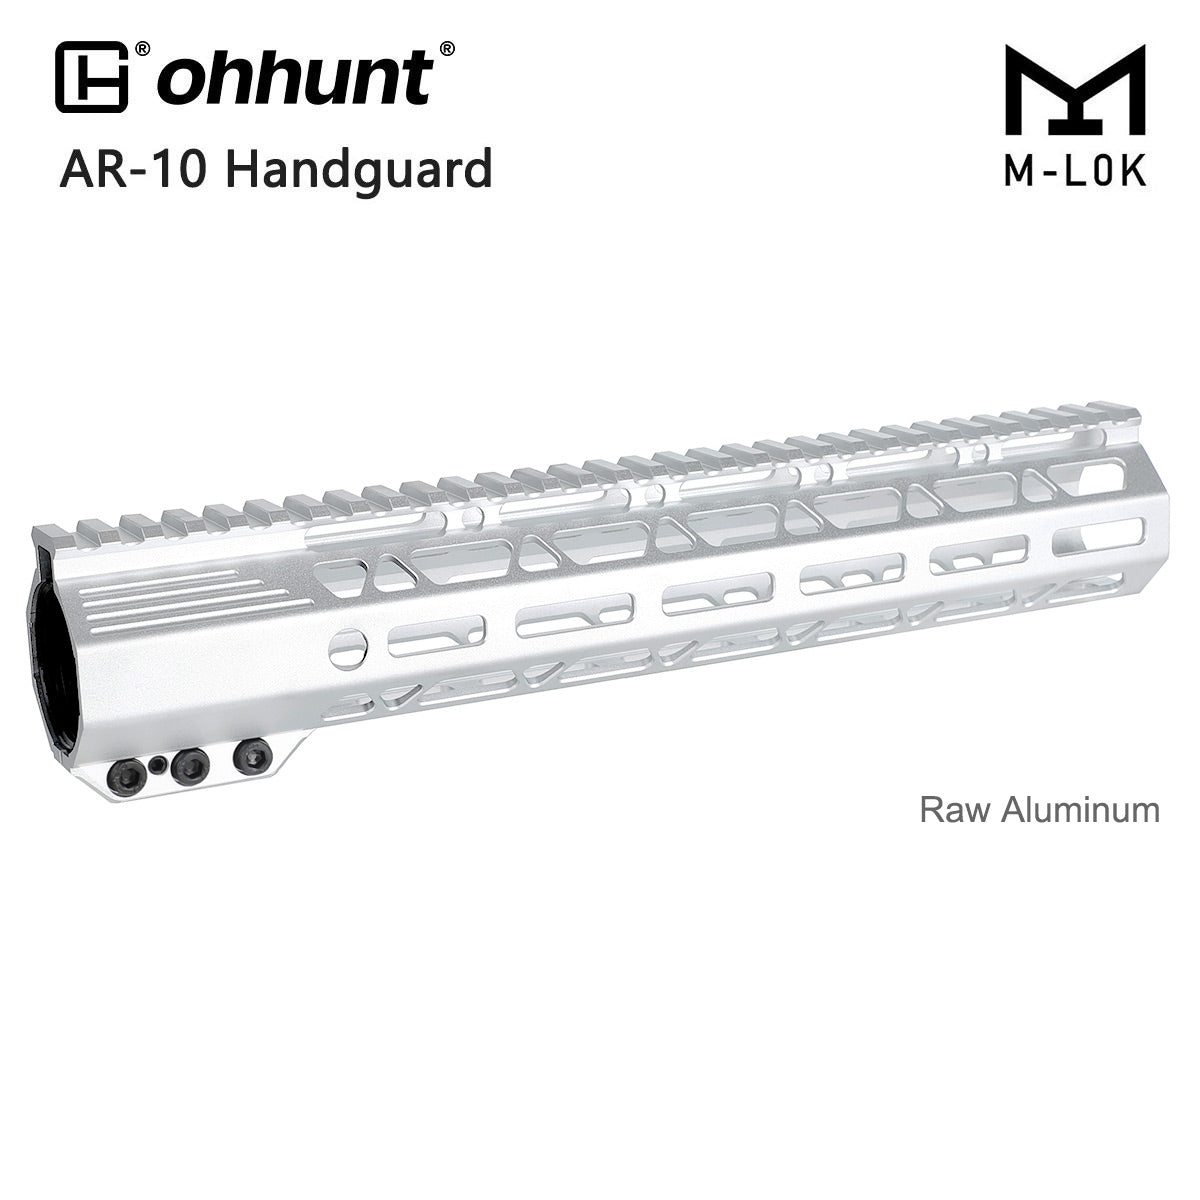 Unbranded Raw AR10 Handguard Unpainted Silver Color - 12 inch